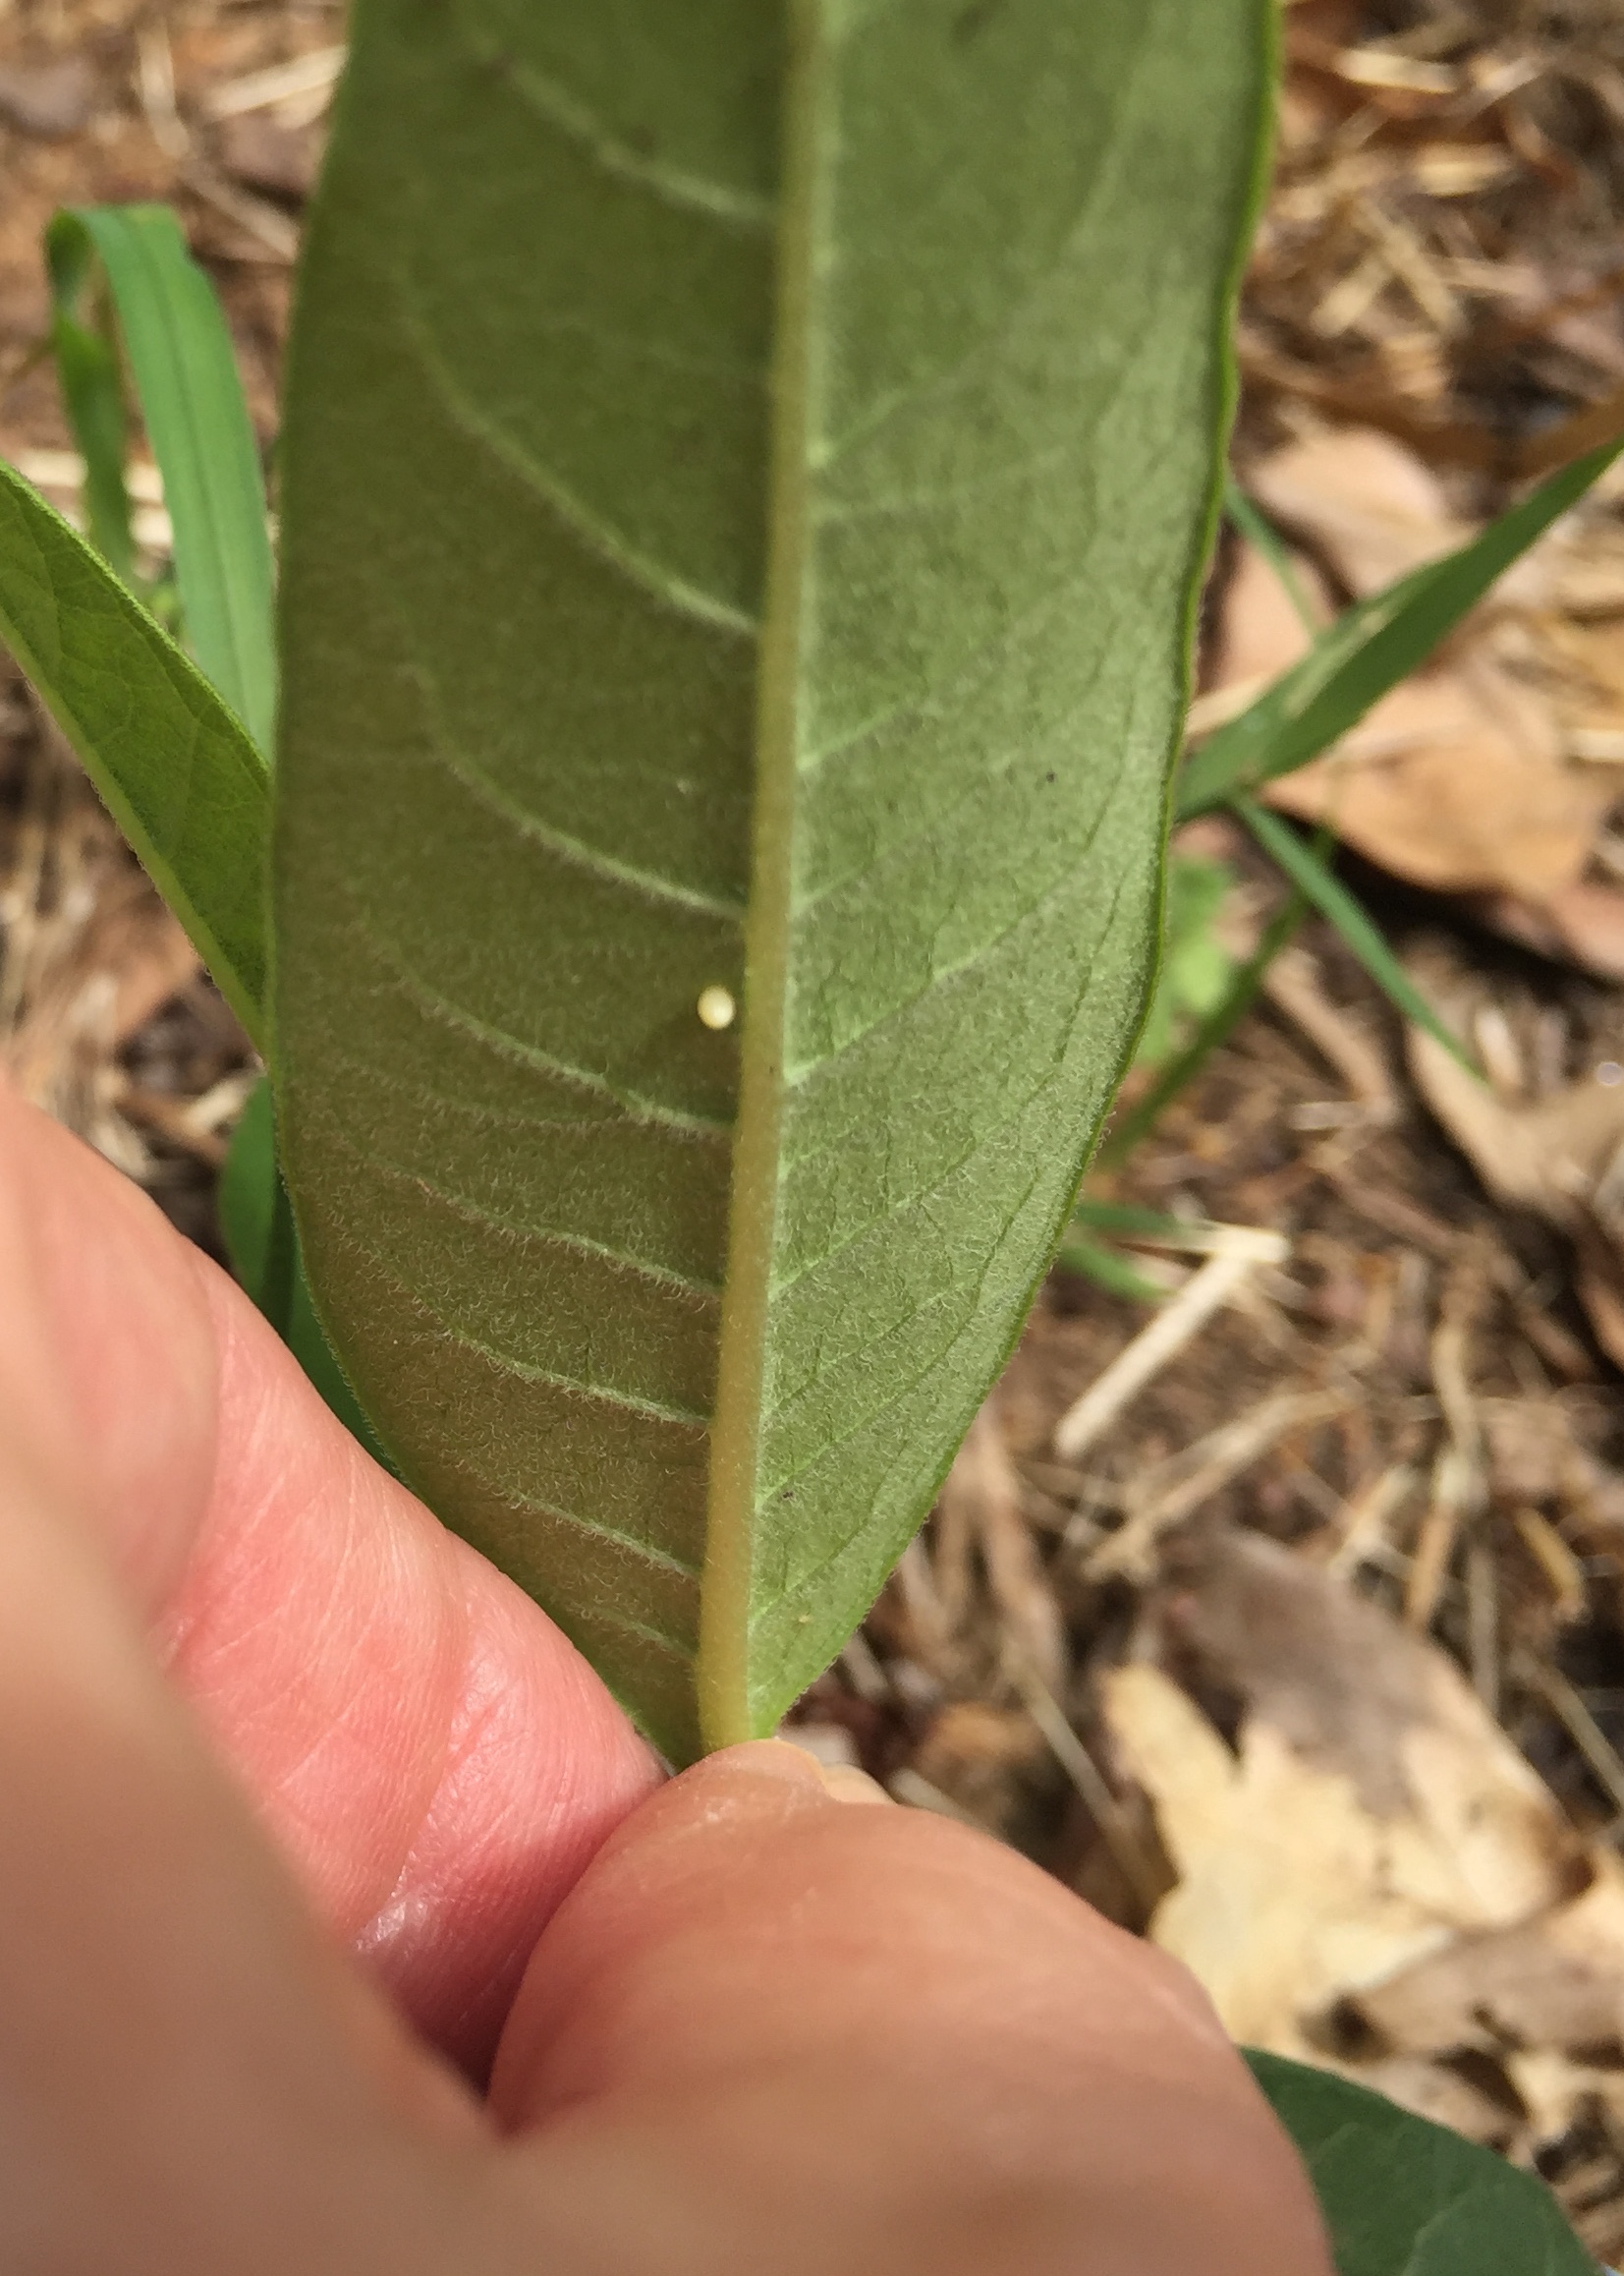 A small white egg, about 2 millimeters long, is attached to the underside of a milkweed leaf.